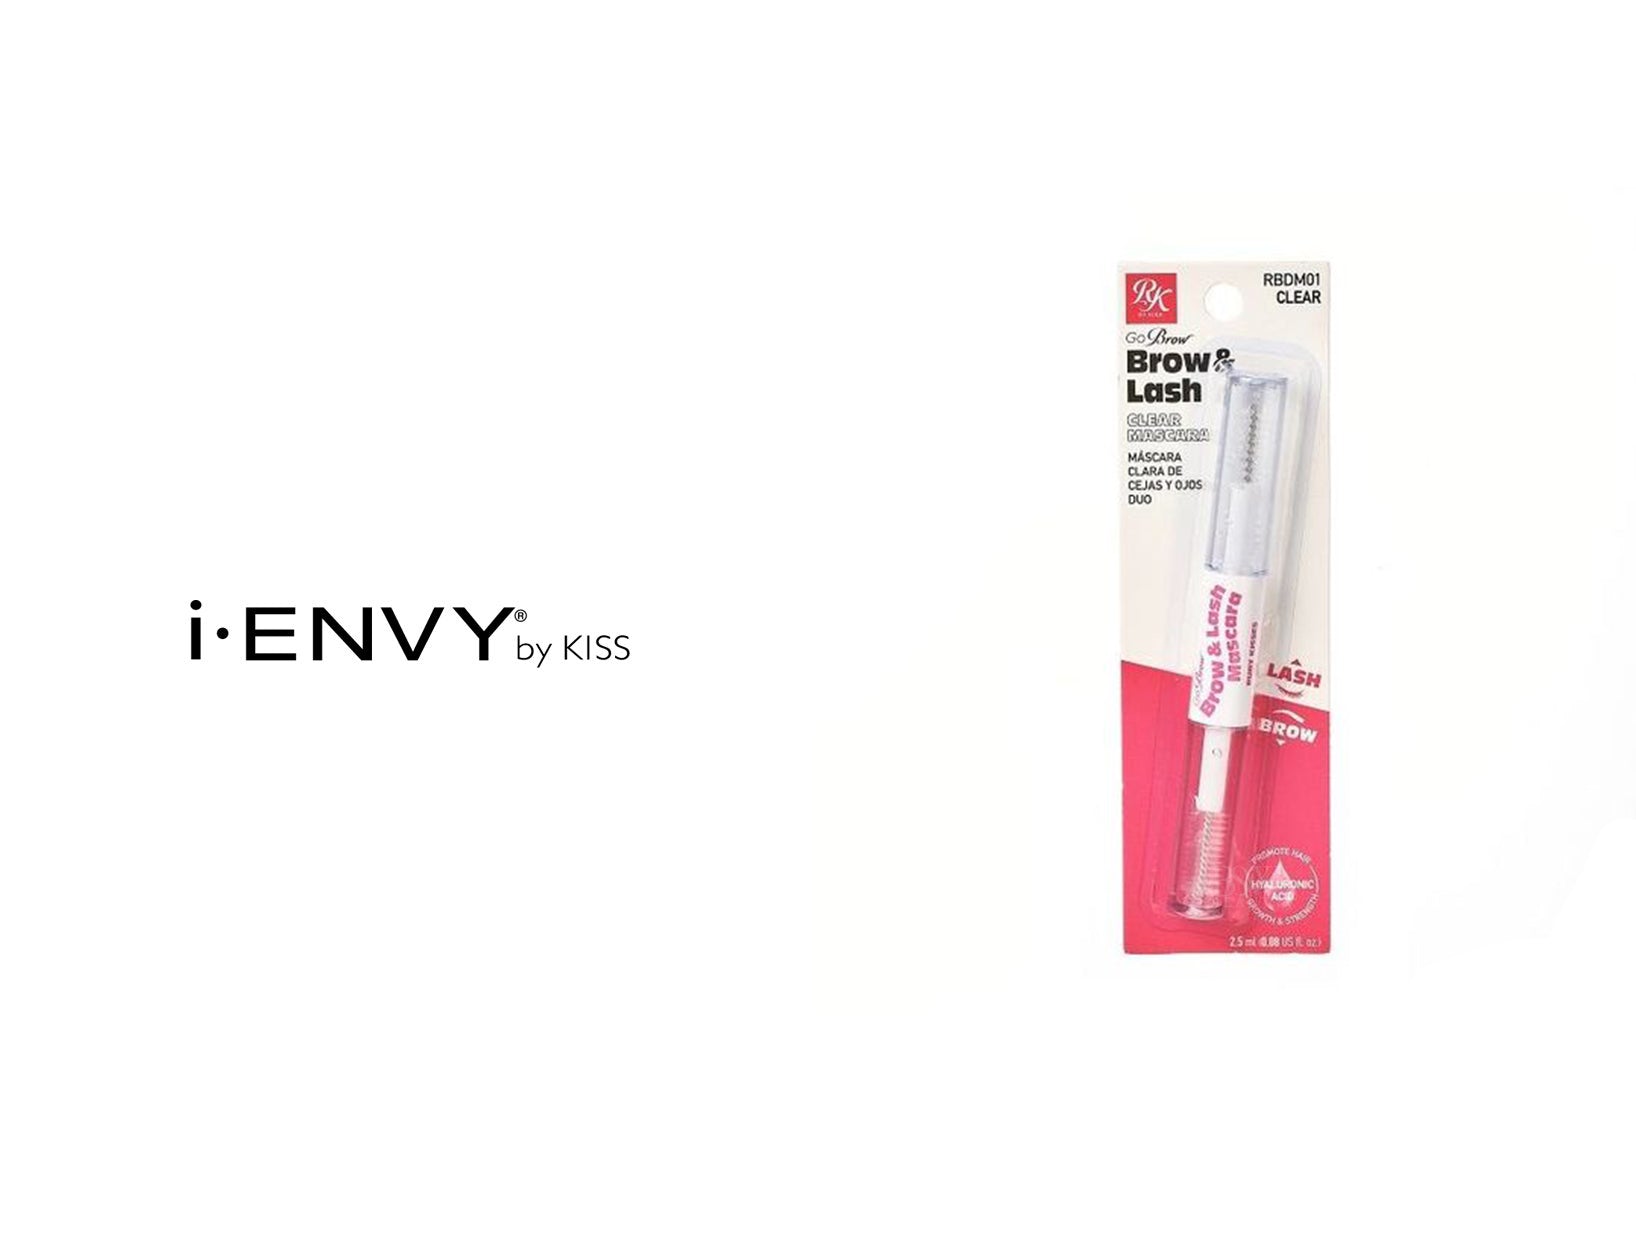 I ENVY BY KISS GO BROW DUO MASCARA - CLEAR